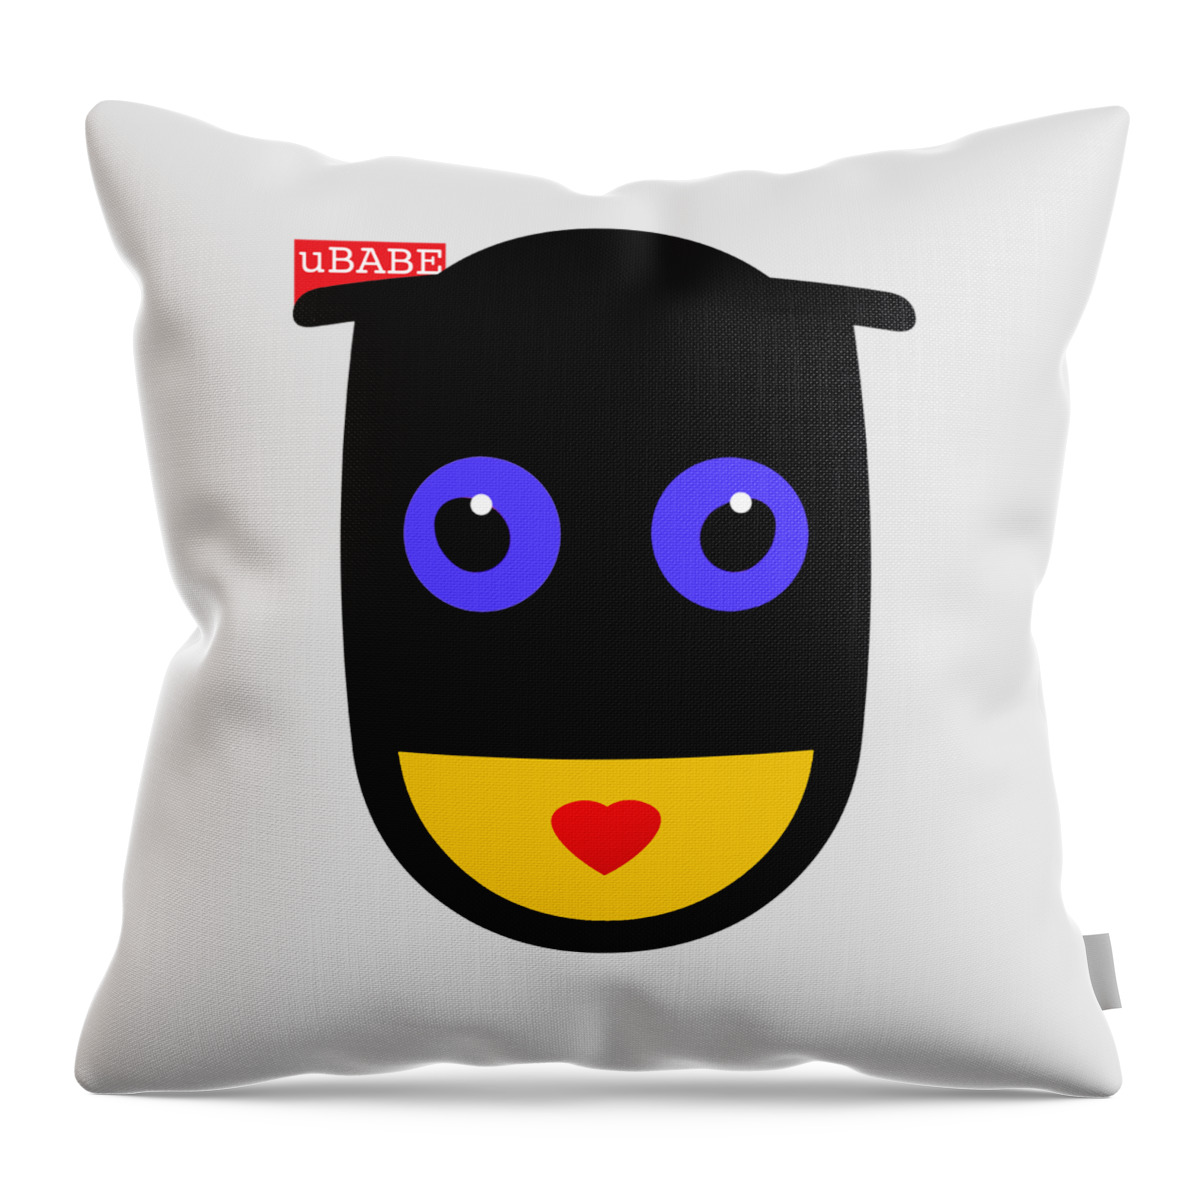 Spy Throw Pillow featuring the digital art Style Secret by Ubabe Style